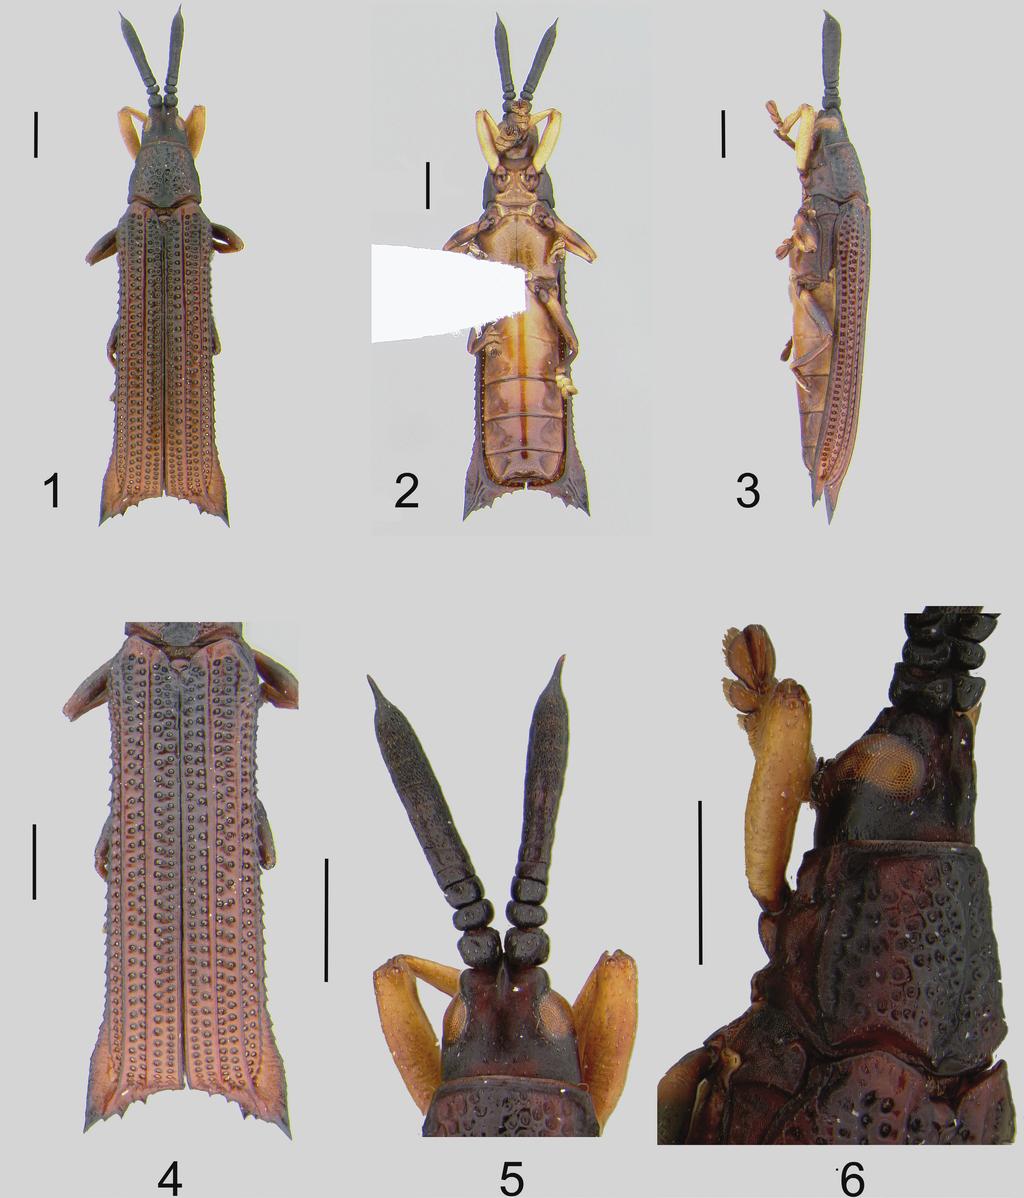 Two New Genera of Hispines Insecta Mundi 0232, June 2012 3 Figures 1 6. Bicristispa gracilis, n. sp. 1) Dorsal. 2) Ventral. 3) Lateral. 4) Elytra. 5) Antennae, head and pronotum. 6) Head lateral.